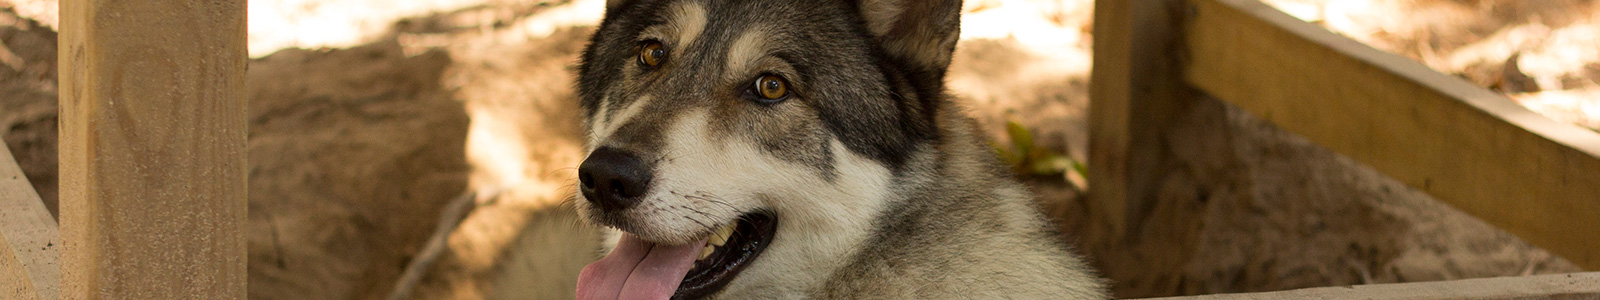 Texas Wolfdog Project Saturday Visitation from 11am to 5pm Header Image